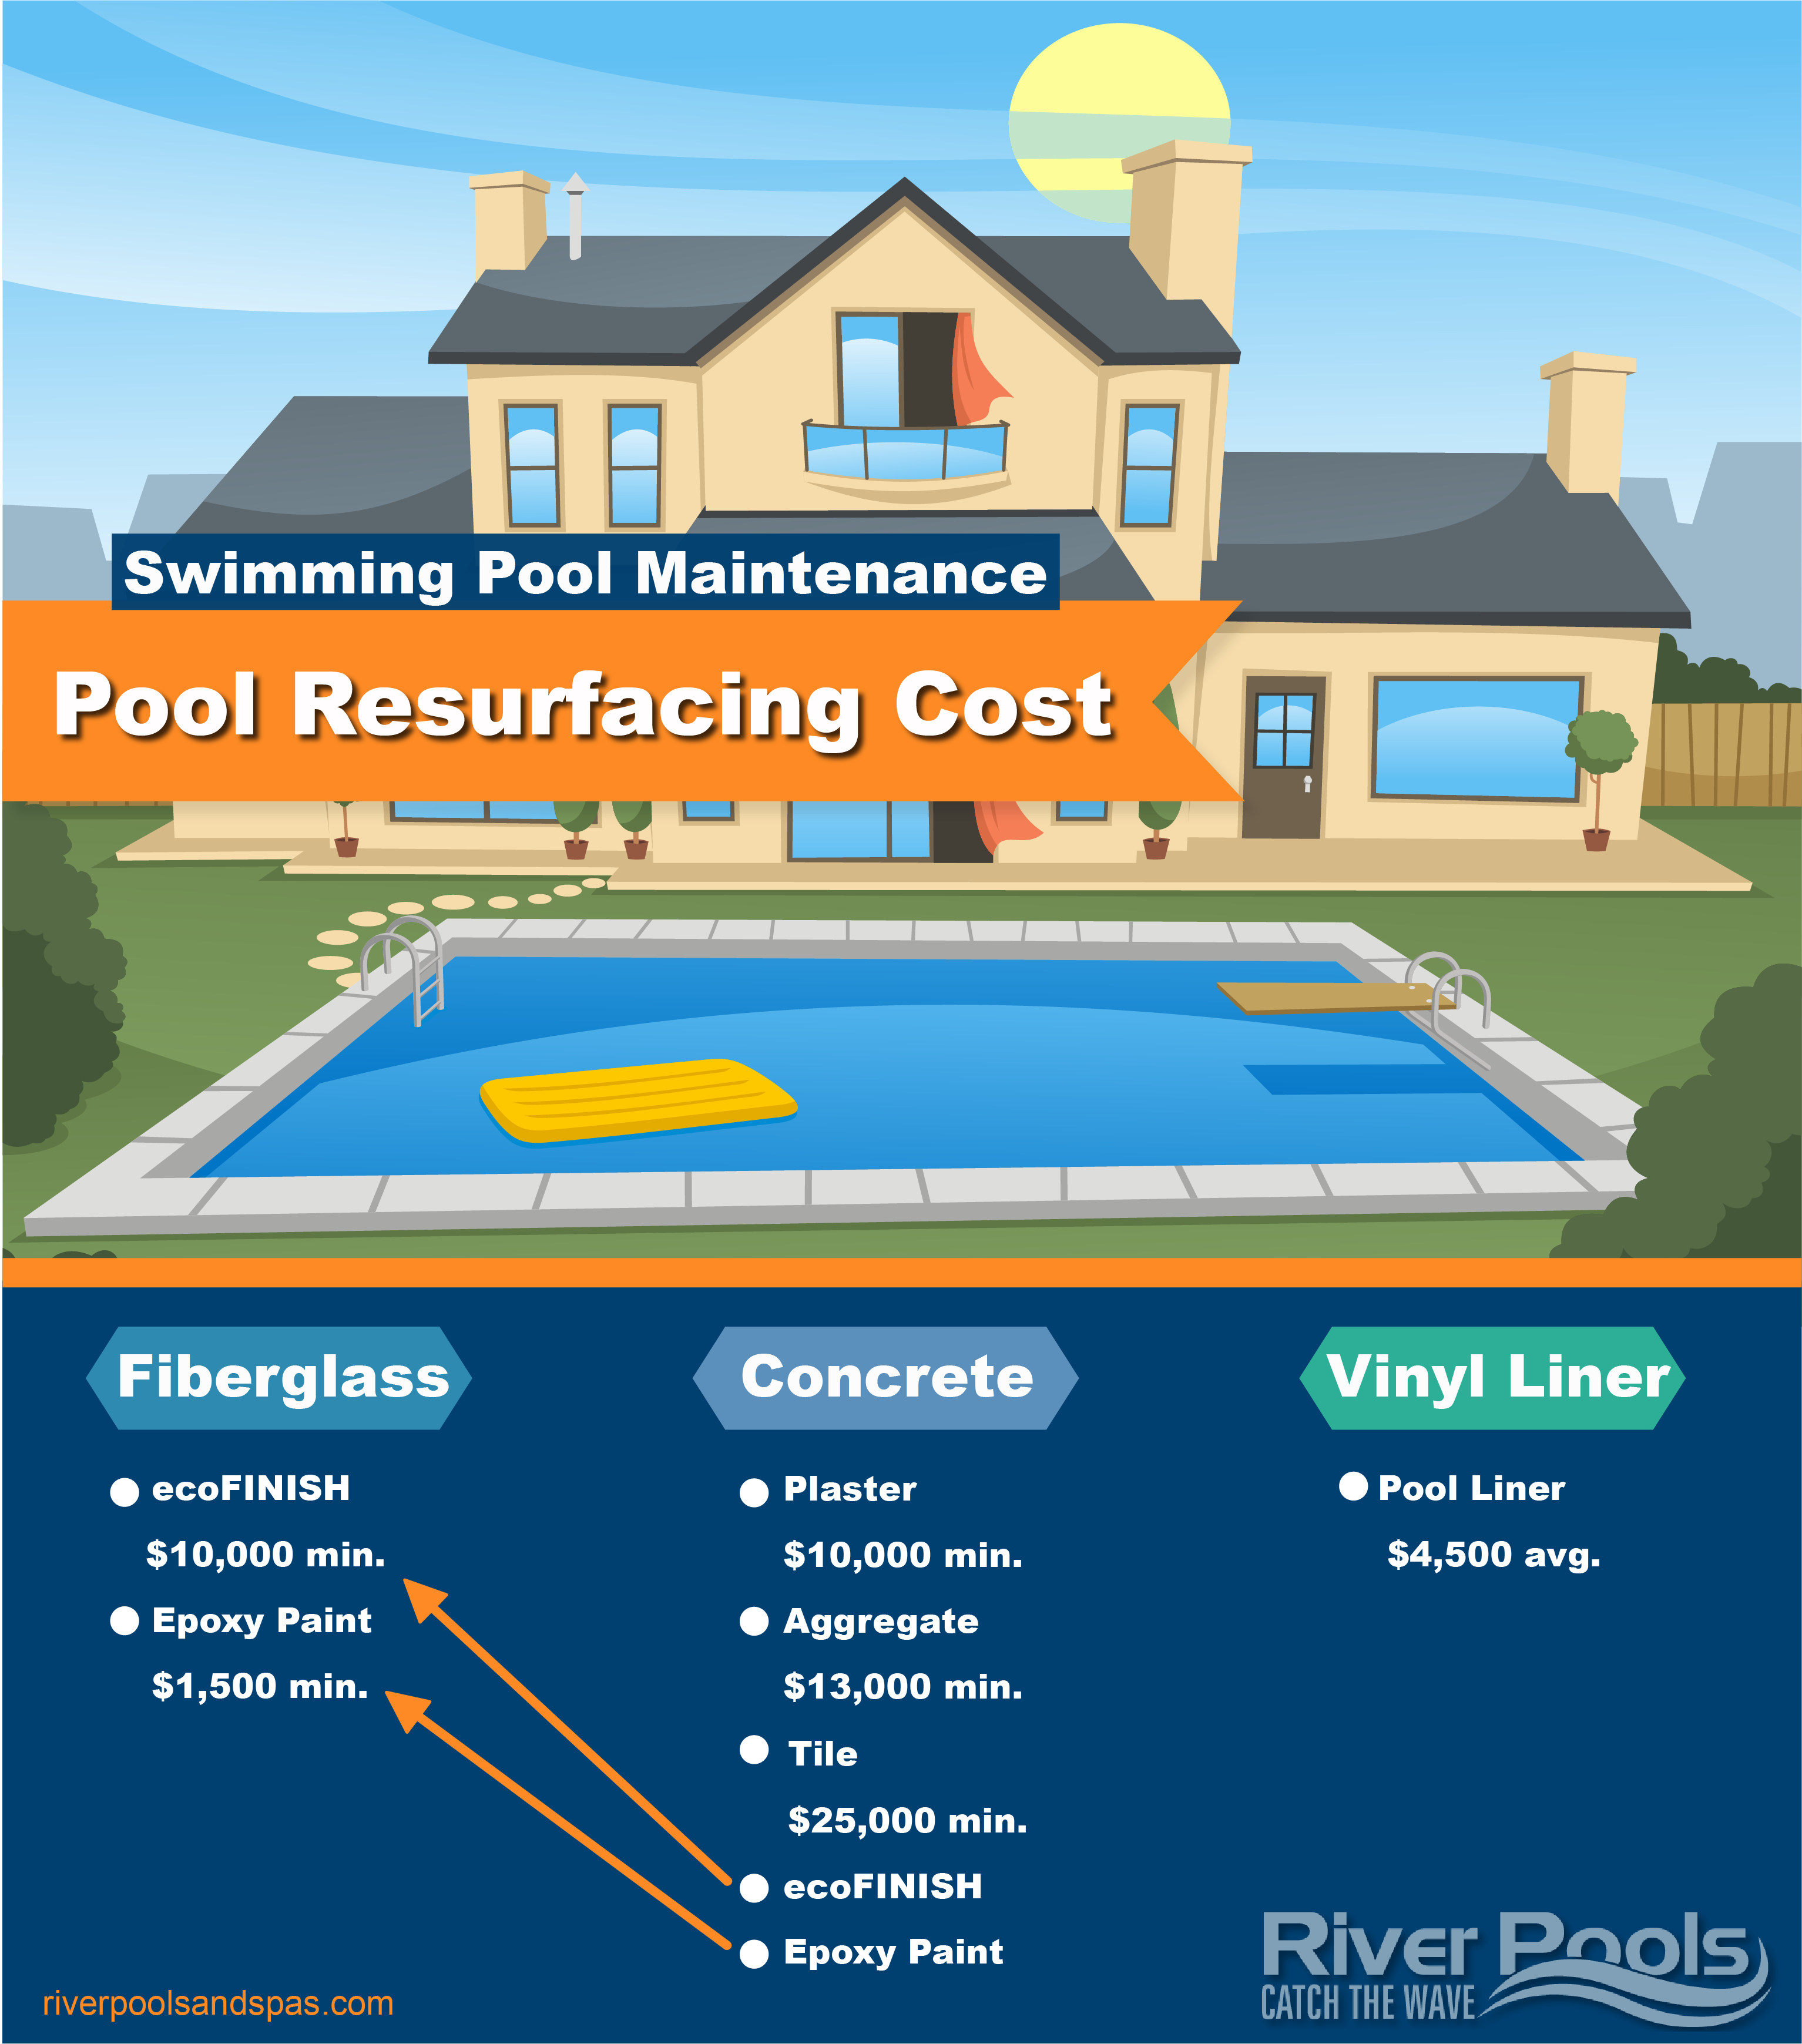 How Much Does Inground Pool Resurfacing Cost?